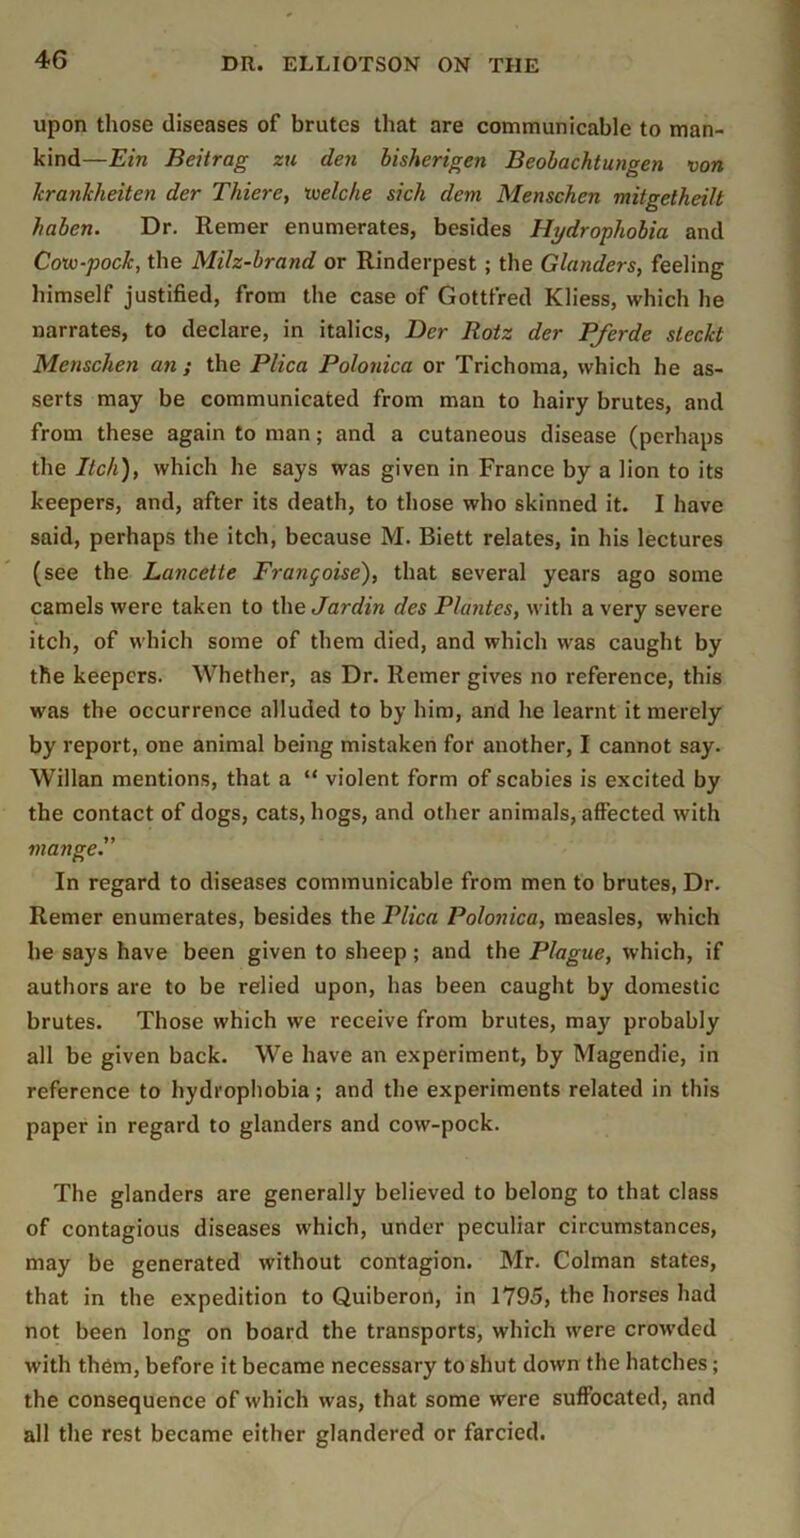 upon those diseases of brutes that are communicable to man- kind—Ein Beitrag zu den bisherigen Beobachtungen von hrankheiten der Thiere, loelche sick dent Menschen mitgetheilt haben. Dr. Remer enumerates, besides Hydrophobia and Covo-pock, the Milz-brand or Rinderpest ; the Glanders, feeling himself justified, from the case of Gottfred Kliess, which he narrates, to declare, in italics, Der Rotz der Pferde sleckt Menschen an; the Plica Polonica or Trichoma, which he as- serts may be communicated from man to hairy brutes, and from these again to man; and a cutaneous disease (perhaps the Itch), which he says was given in France by a lion to its keepers, and, after its death, to those who skinned it. I have said, perhaps the itch, because M. Biett relates, in his lectures (see the Lancette Frangoise), that several years ago some camels were taken to the Jardin des Plantes, with a very severe itch, of which some of them died, and which was caught by the keepers. Whether, as Dr. Remer gives no reference, this was the occurrence alluded to by him, and he learnt it merely by report, one animal being mistaken for another, I cannot say. Willan mentions, that a “ violent form of scabies is excited by the contact of dogs, cats, hogs, and other animals, affected with mange. In regard to diseases communicable from men to brutes. Dr. Remer enumerates, besides the Plica Polonica, measles, which he says have been given to sheep; and the Plague, which, if authors are to be relied upon, has been caught by domestic brutes. Those which we receive from brutes, may probably all be given back. We have an experiment, by Magendie, in reference to hydrophobia; and the experiments related in this paper in regard to glanders and cow-pock. The glanders are generally believed to belong to that class of contagious diseases which, under peculiar circumstances, may be generated without contagion. Mr. Colman states, that in the expedition to Quiberon, in 1795, the horses had not been long on board the transports, which were crowded with them, before it became necessary to shut down the hatches; the consequence of which was, that some were suffocated, and all the rest became either glandered or farcied.